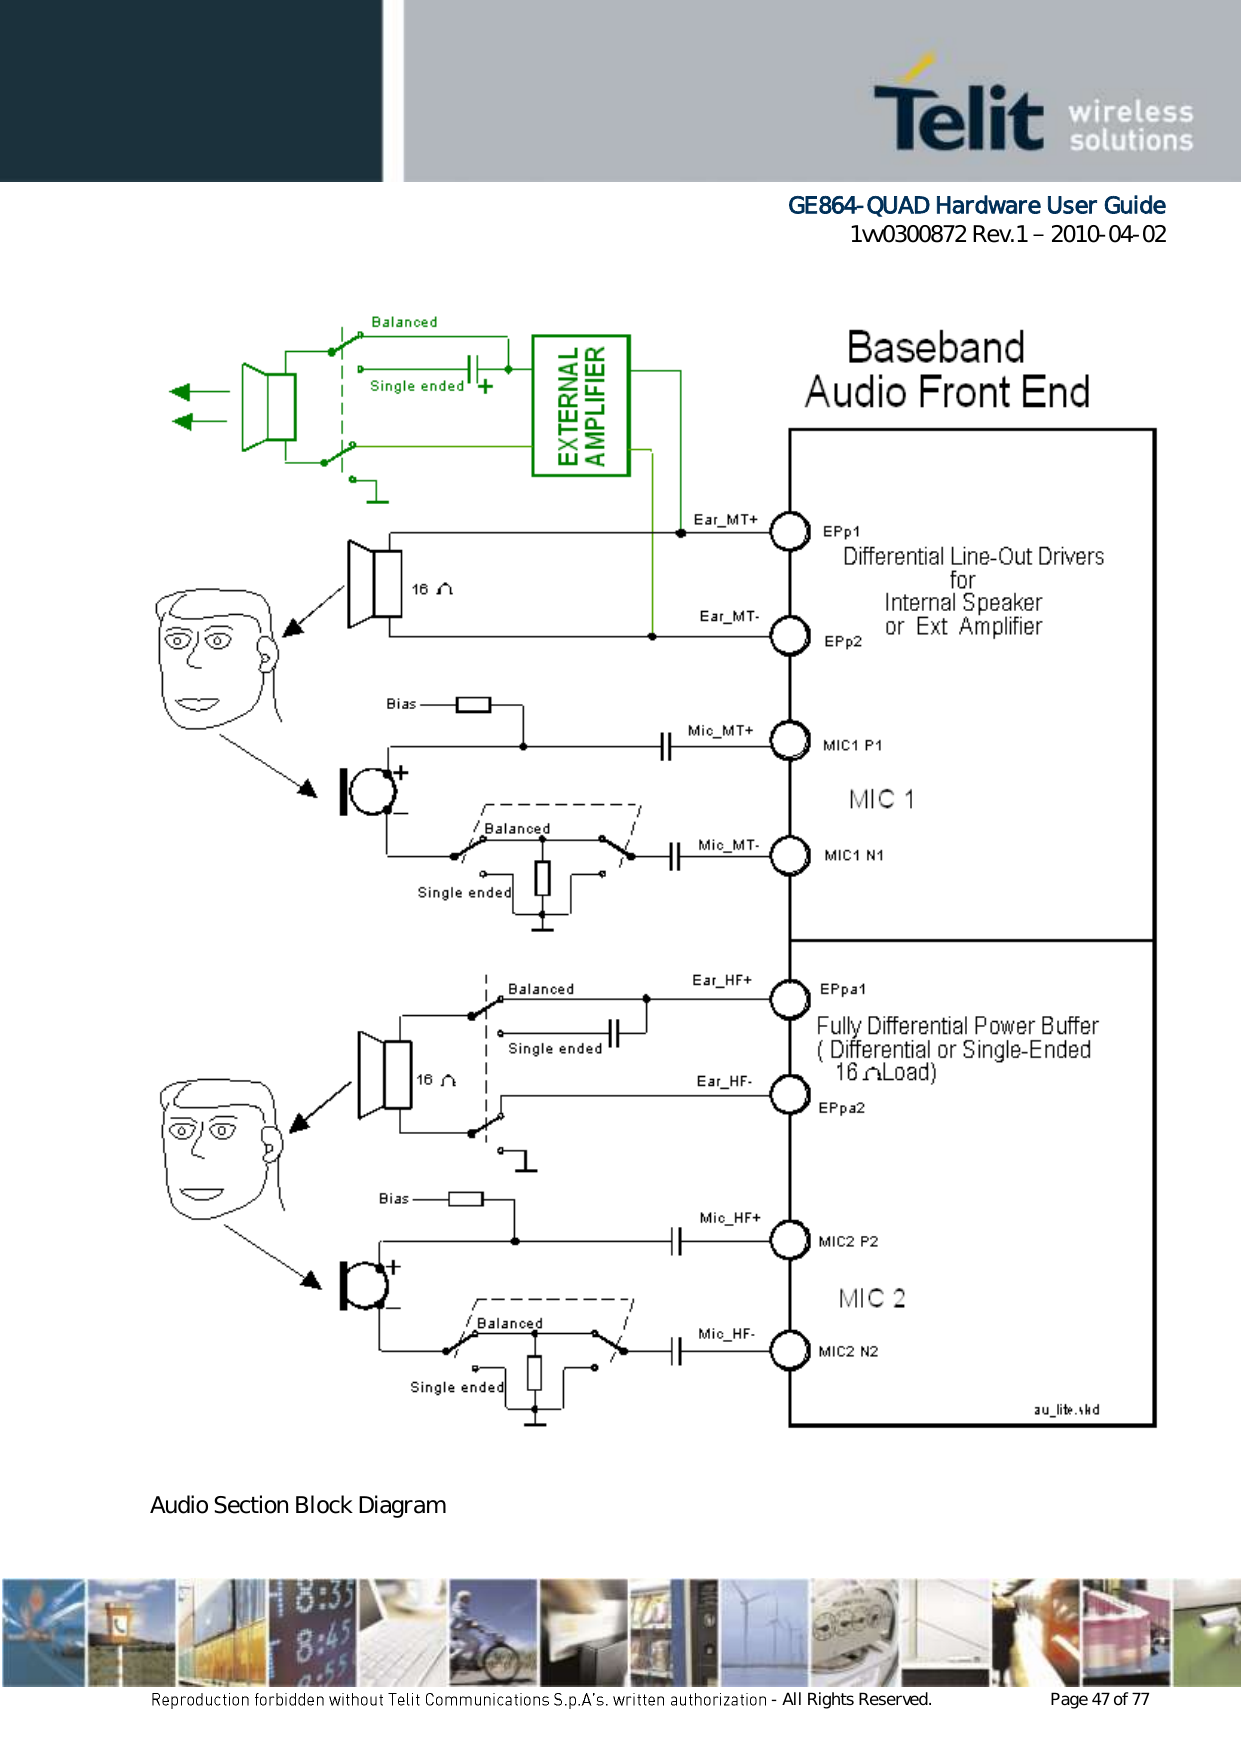      GE864-QUAD Hardware User Guide 1vv0300872 Rev.1   2010-04-02 - All Rights Reserved.    Page 47 of 77     Audio Section Block Diagram 